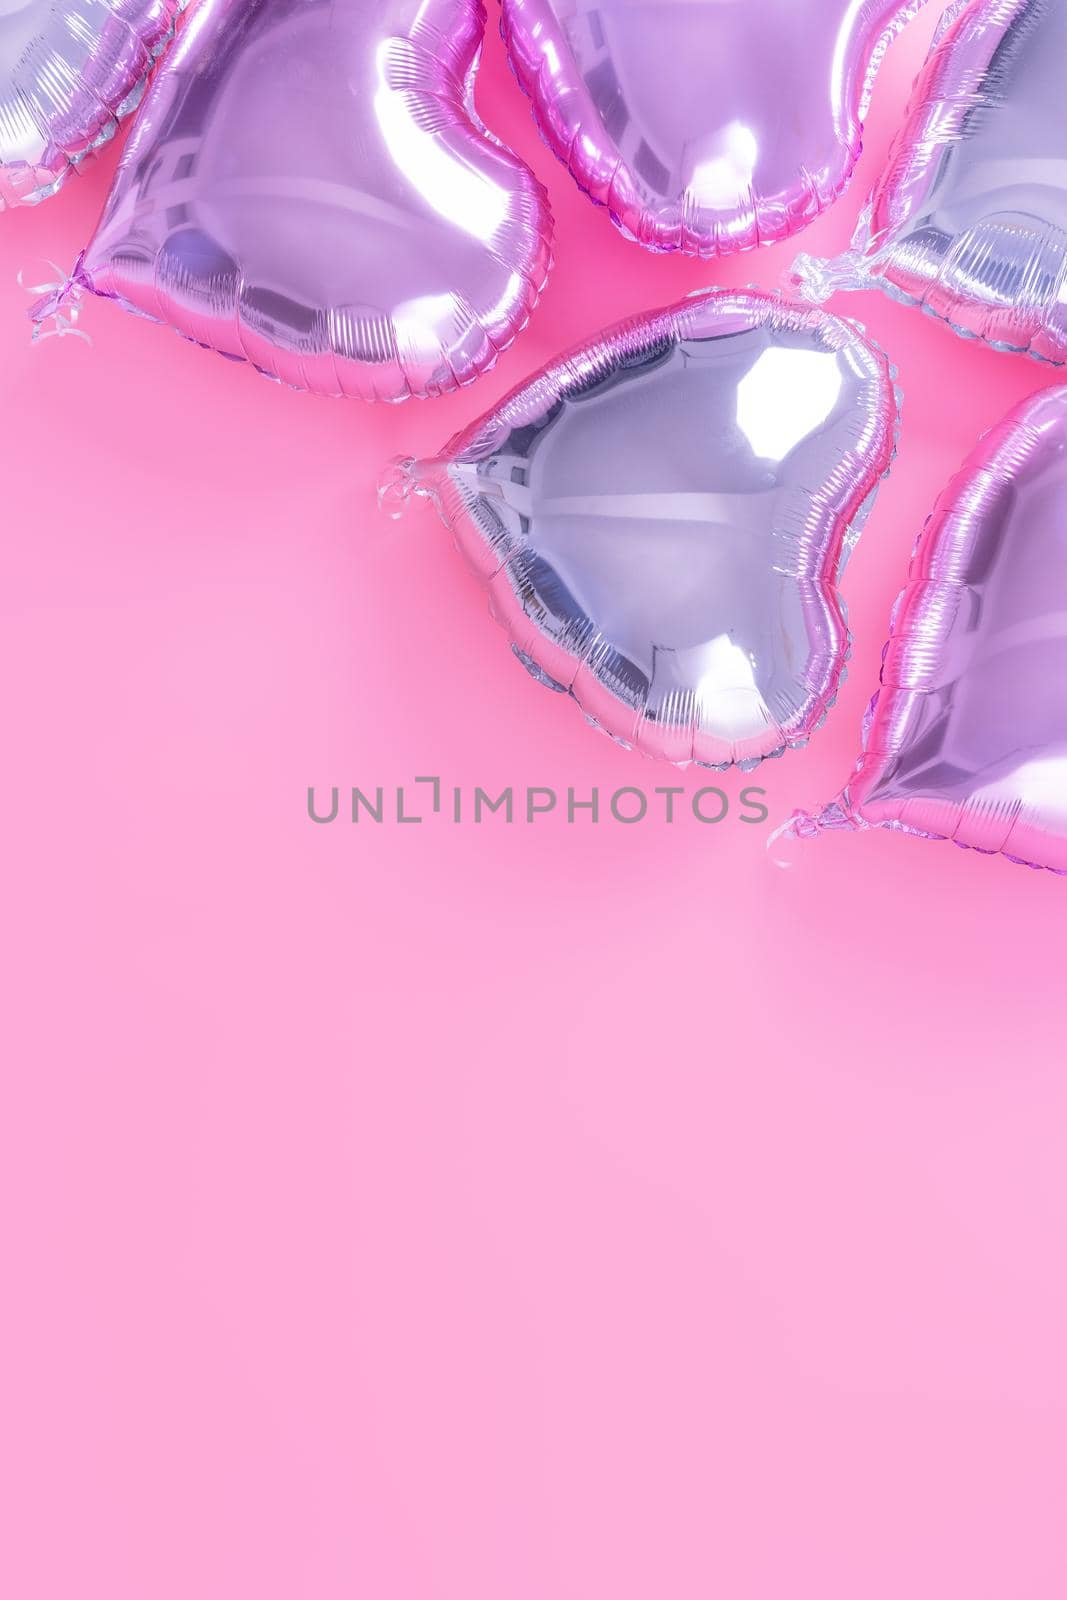 Valentine's Day romantic design concept - Beautiful real heart shape foil balloon isolated on pale pink background, top view, flat lay, overhead above photography.